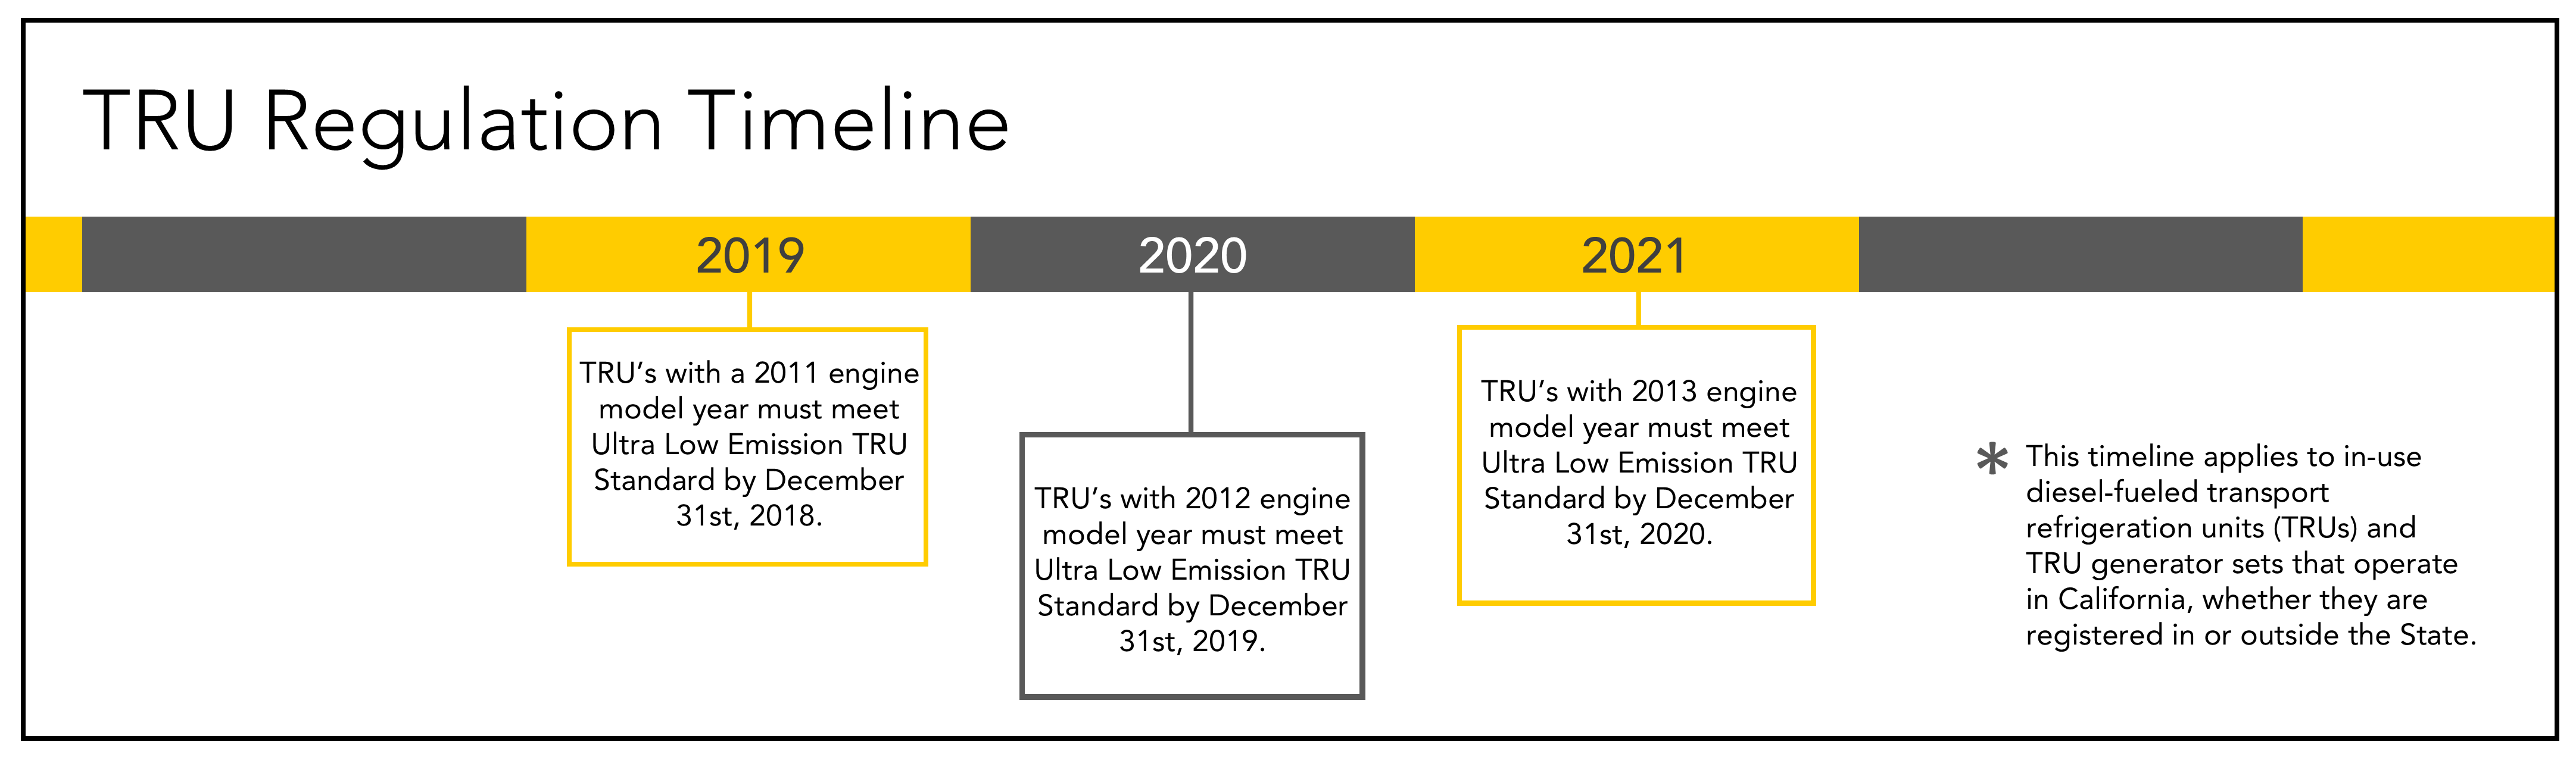 TRU's with a 2011 engine year must meet Ultra-Low-Emission TRU standard by December 31, 2018. TRU's with a 2012 engine model year must meet Ultra-Low-Emission TRU Standard by December 31, 2019. TRU's with a 2013 engine model year must meet Ultra-Low-Emission TRU Standard by December 31, 2020. This timeline applies to in-use diesel-fueled Transport Refrigeration Unites (TRUs) and TRU generator sets that operate in California, whether they are registered in or outside the State.